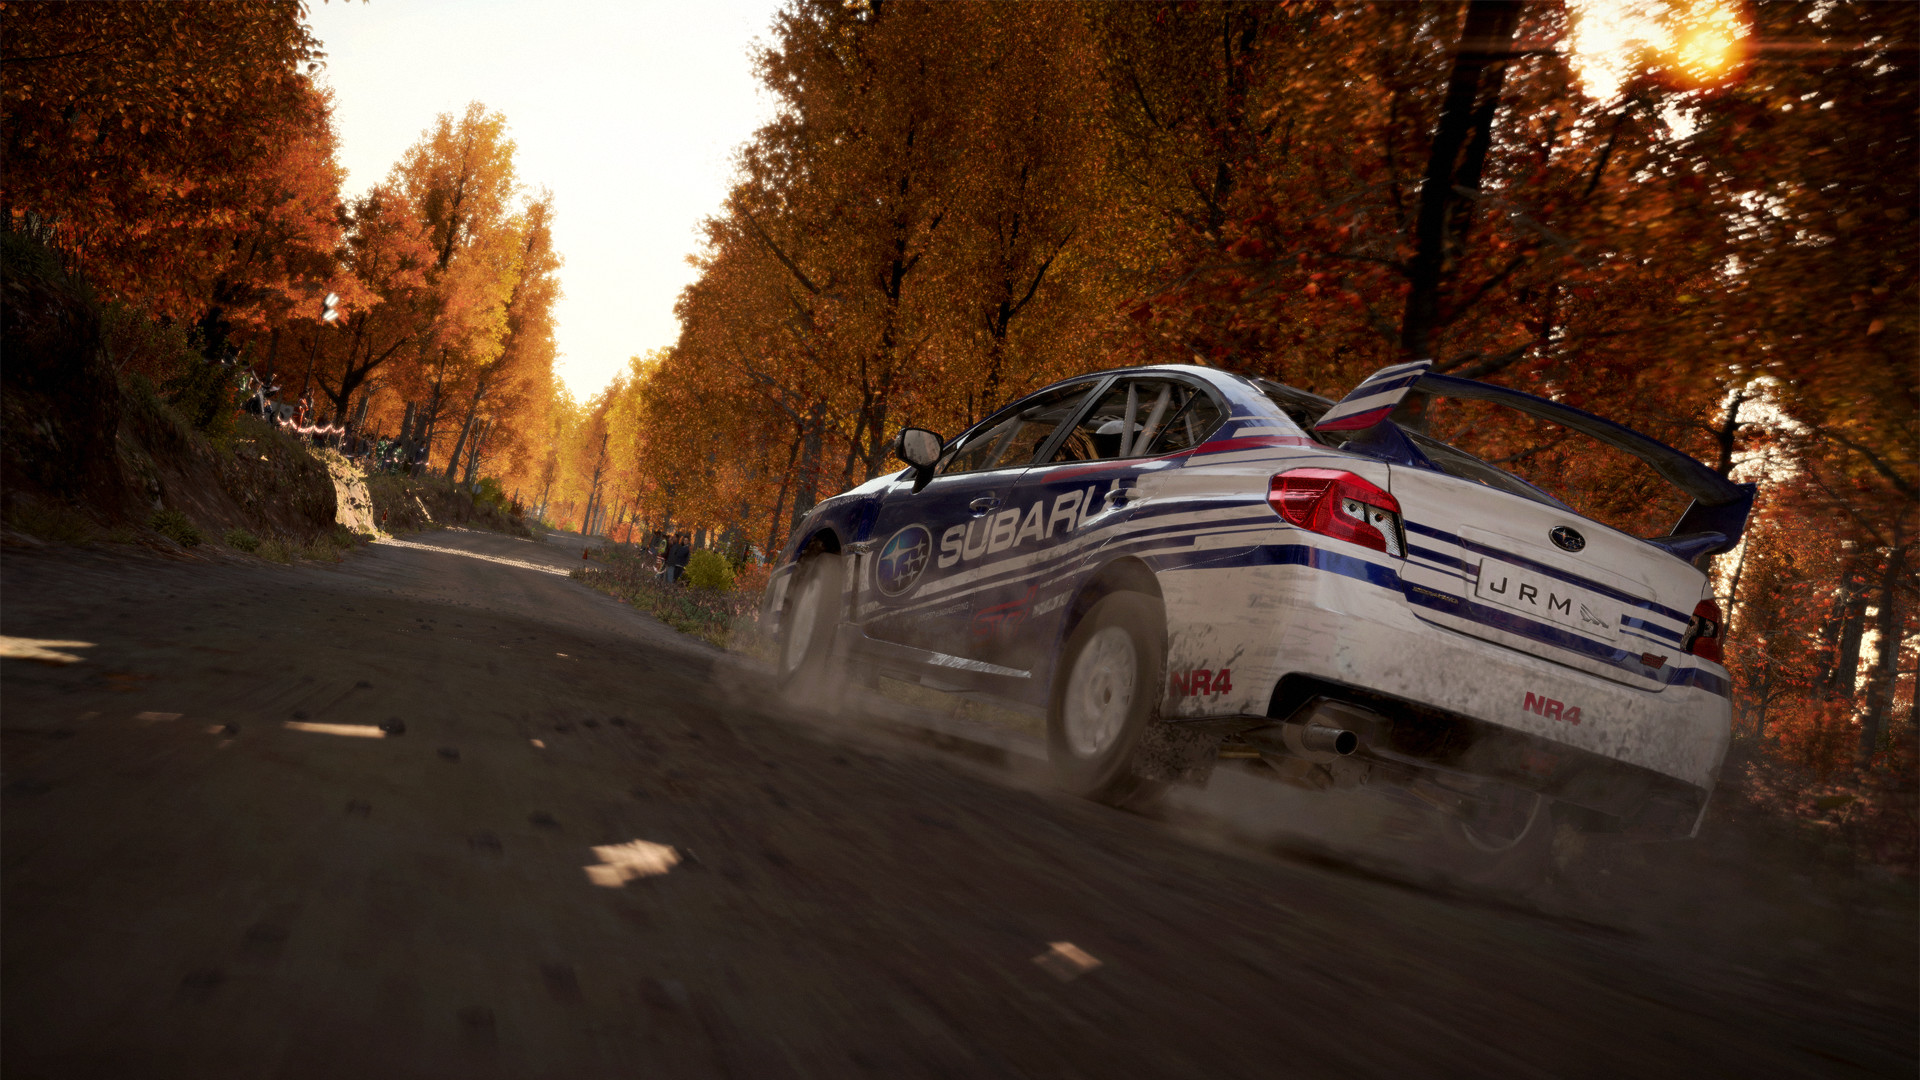 Find the best laptops for DiRT 4